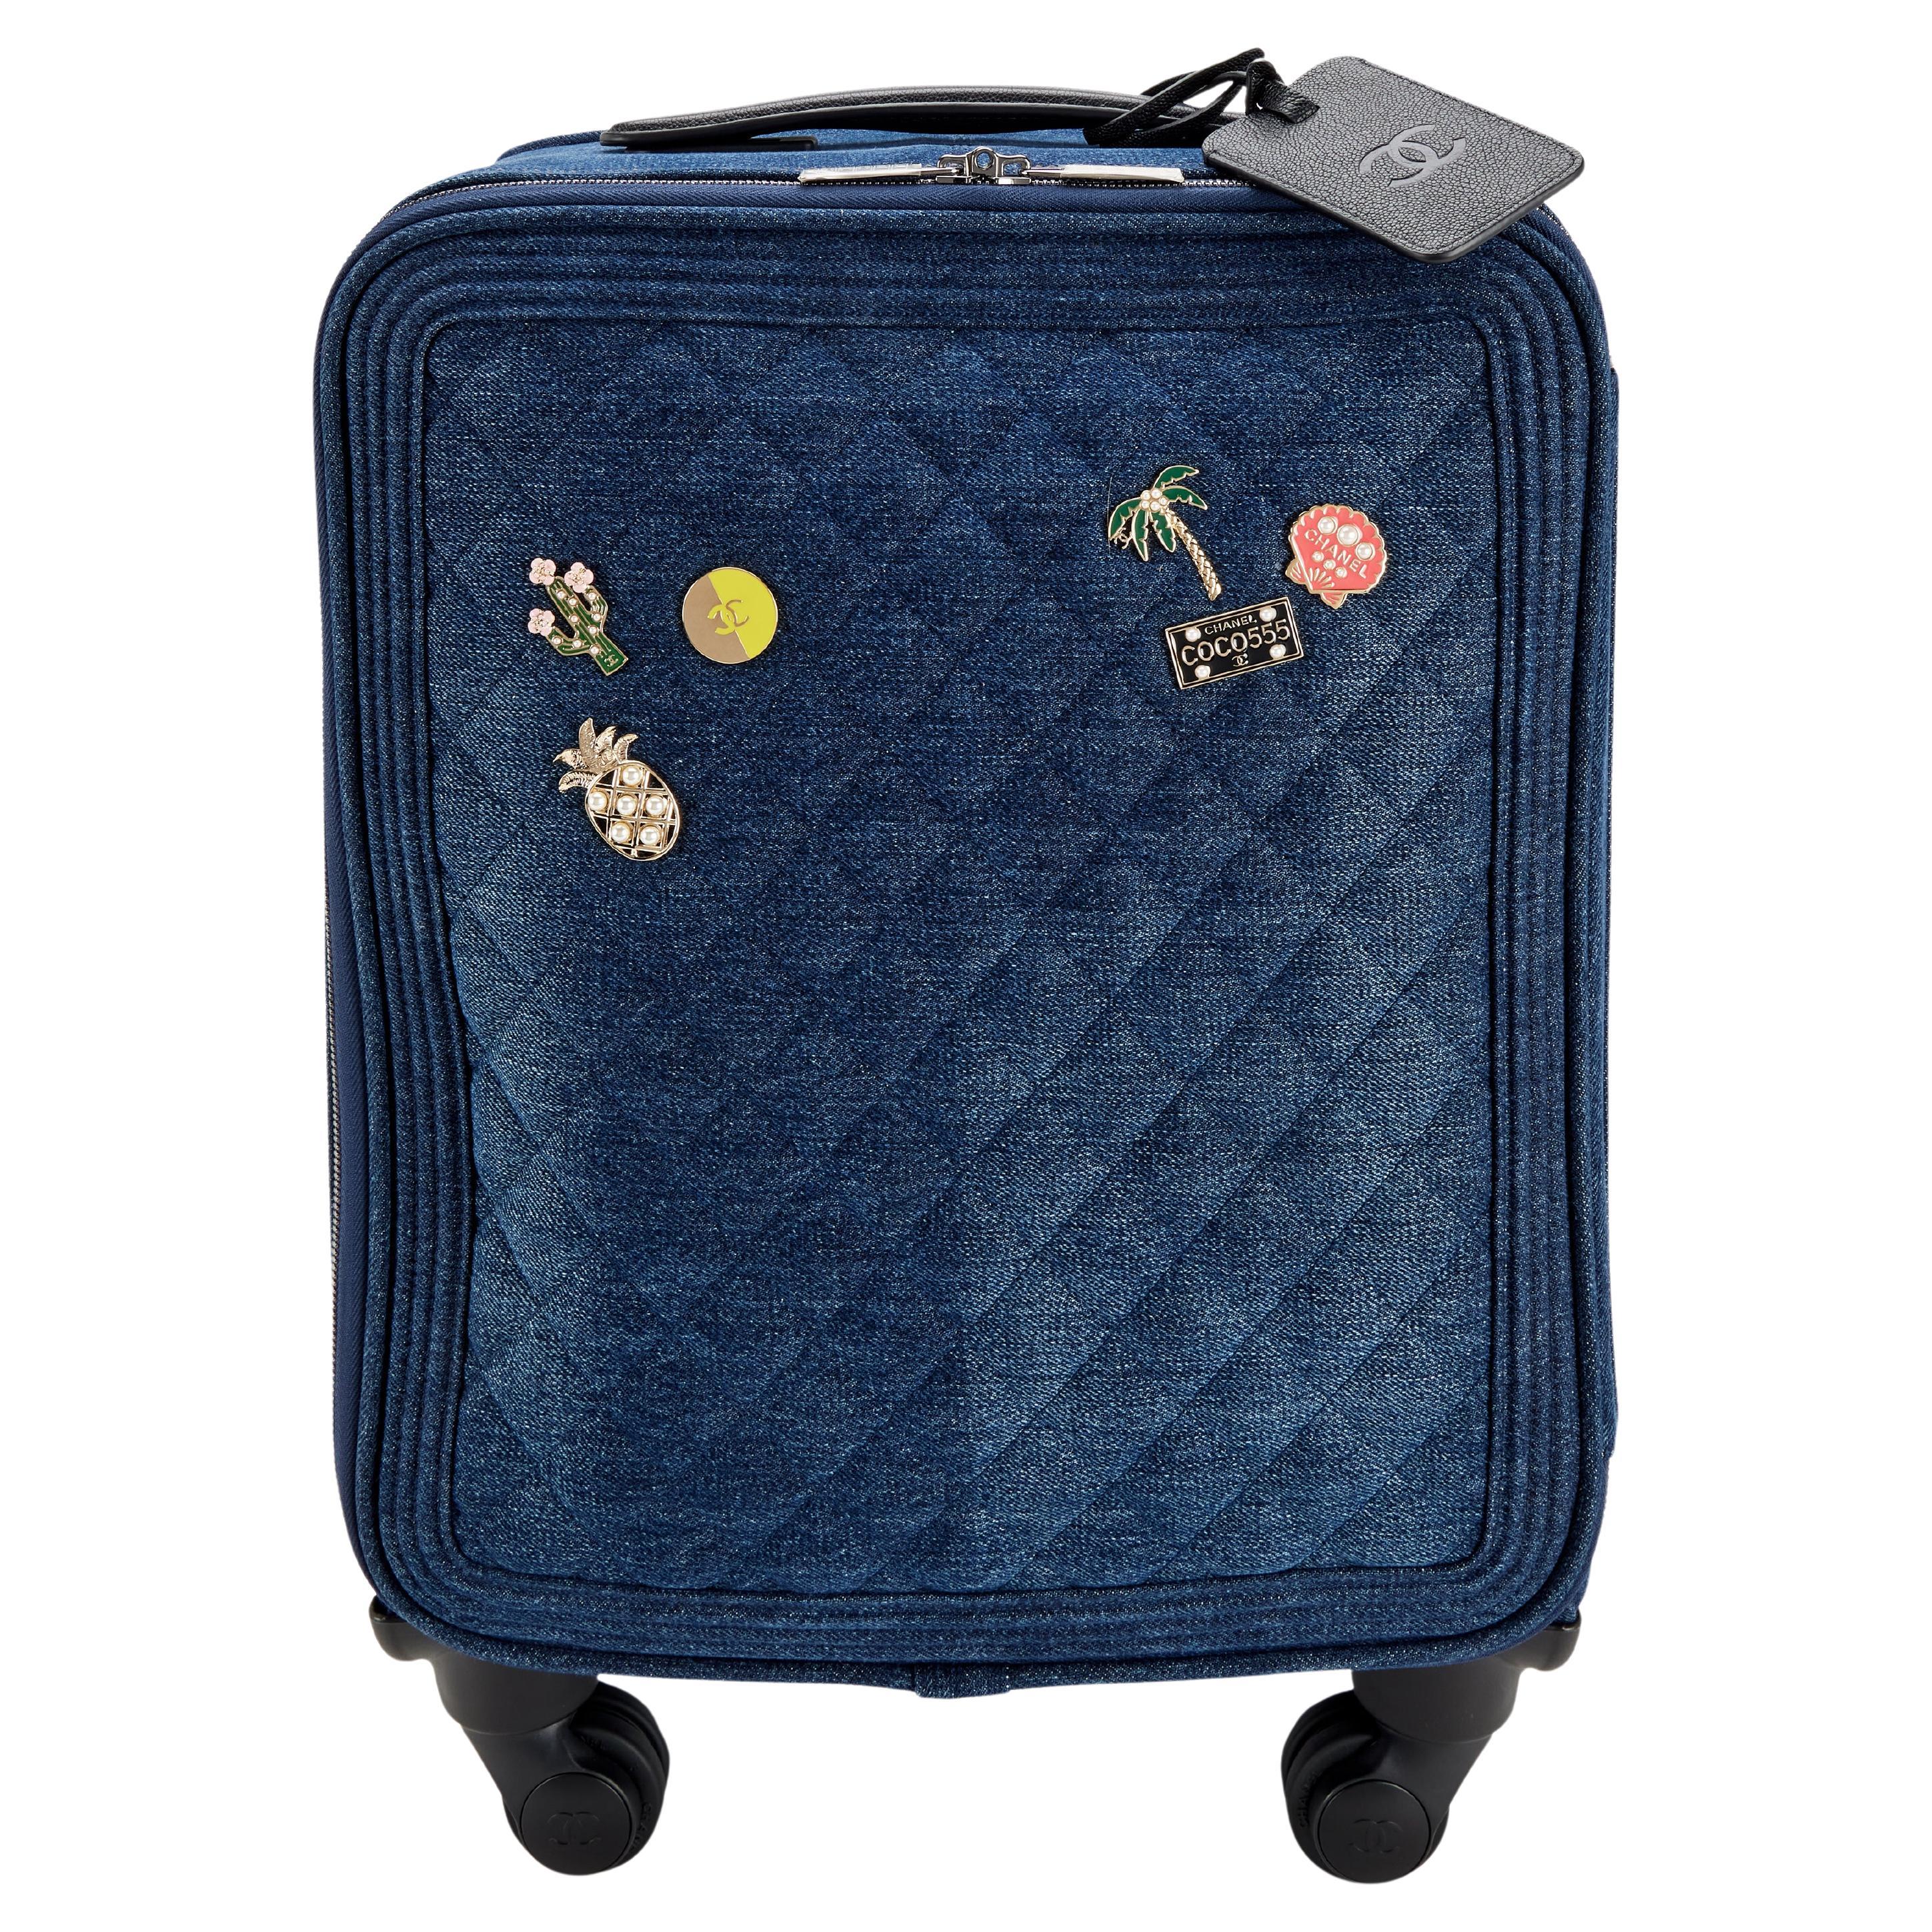 Chanel Coco Chanel Denim Jean Trolley Travel Luggage Rolling Carry On Bag